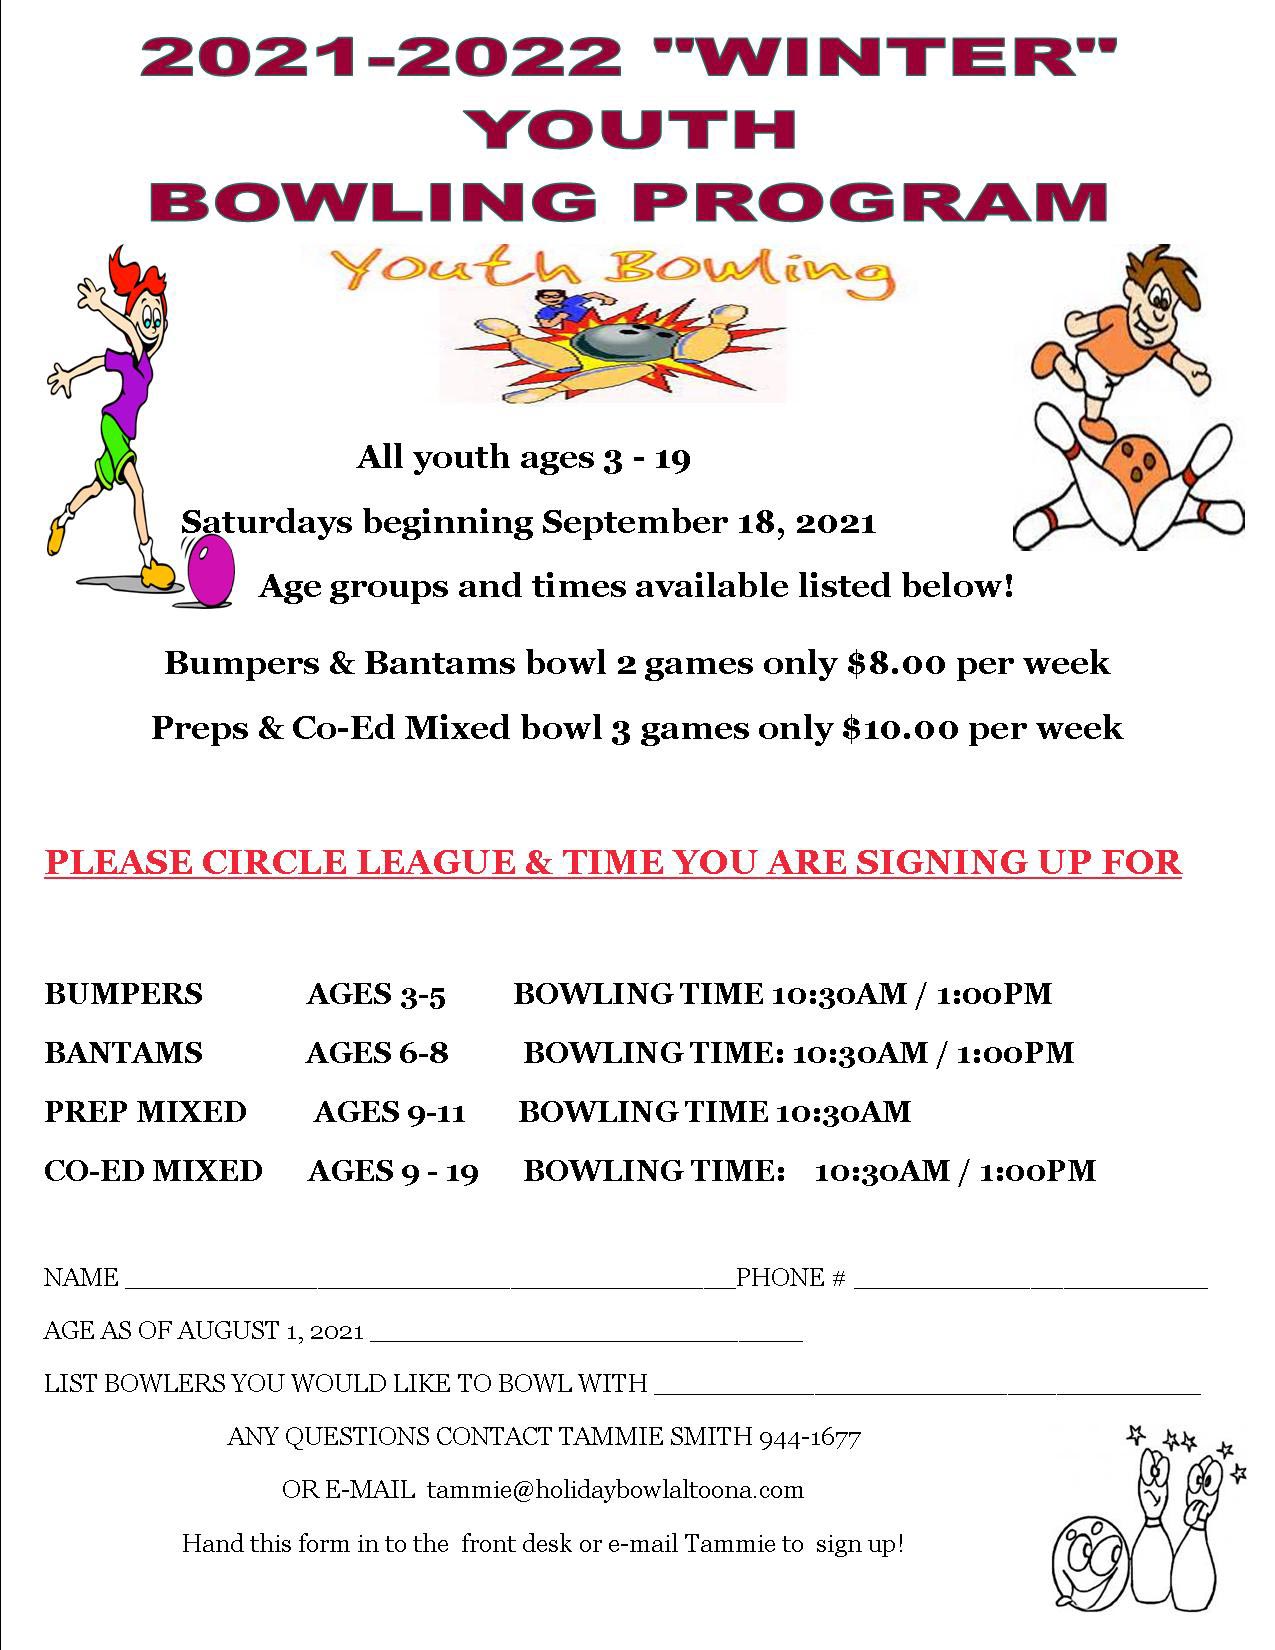 Holiday Bowl Altoona | Winter Youth Bowling Program for 2021-2022